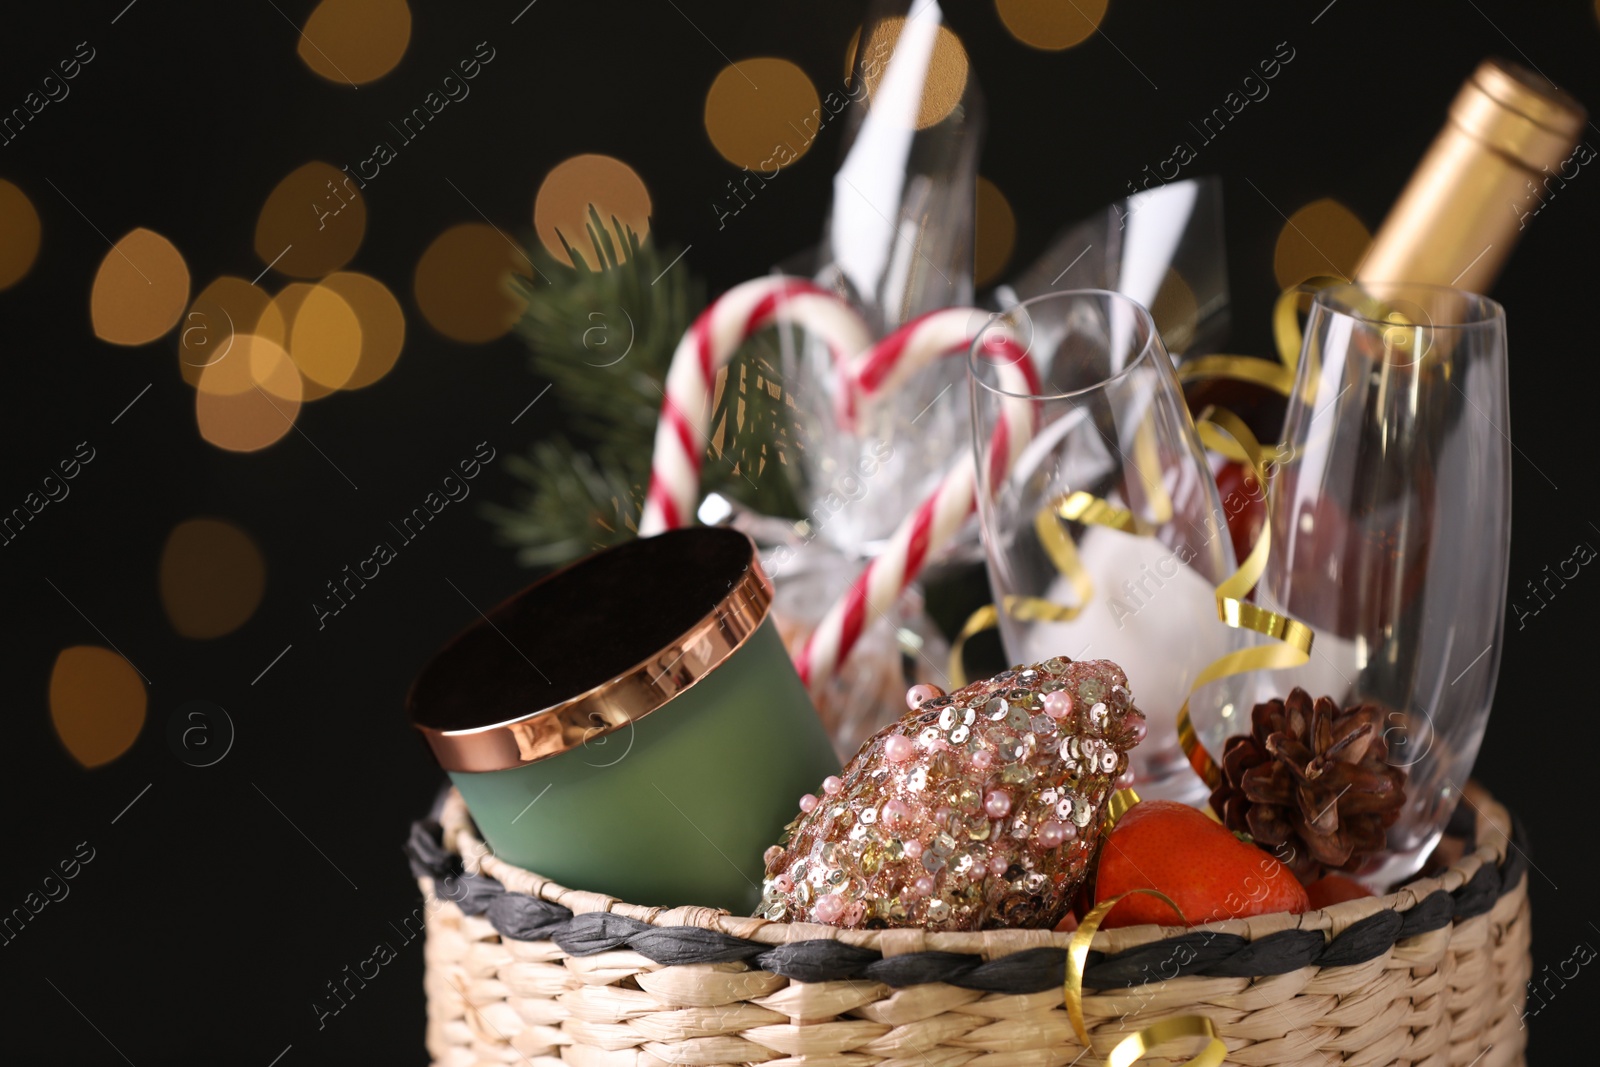 Photo of Wicker basket with Christmas gift set on black background with festive lights, closeup